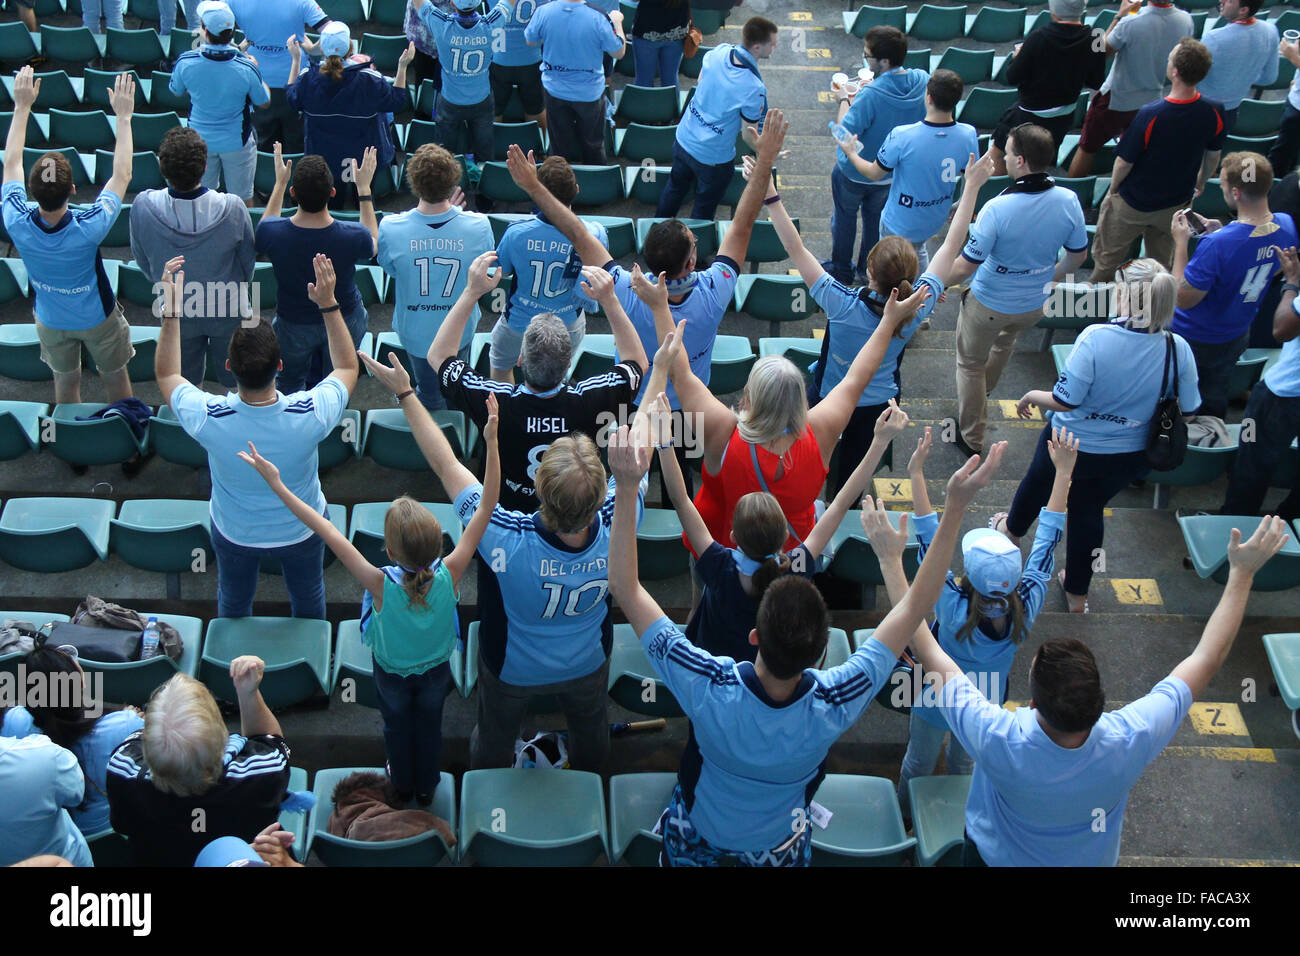 Sydney, Australia. 26 December 2015. Sydney FC defeated Central Coast Mariners by four goals to one in the round 12 A-League match at Allianz Stadium, Moore Park. Pictured: Sydney FC fans from above. Copyright: carrot/Alamy Live News Stock Photo